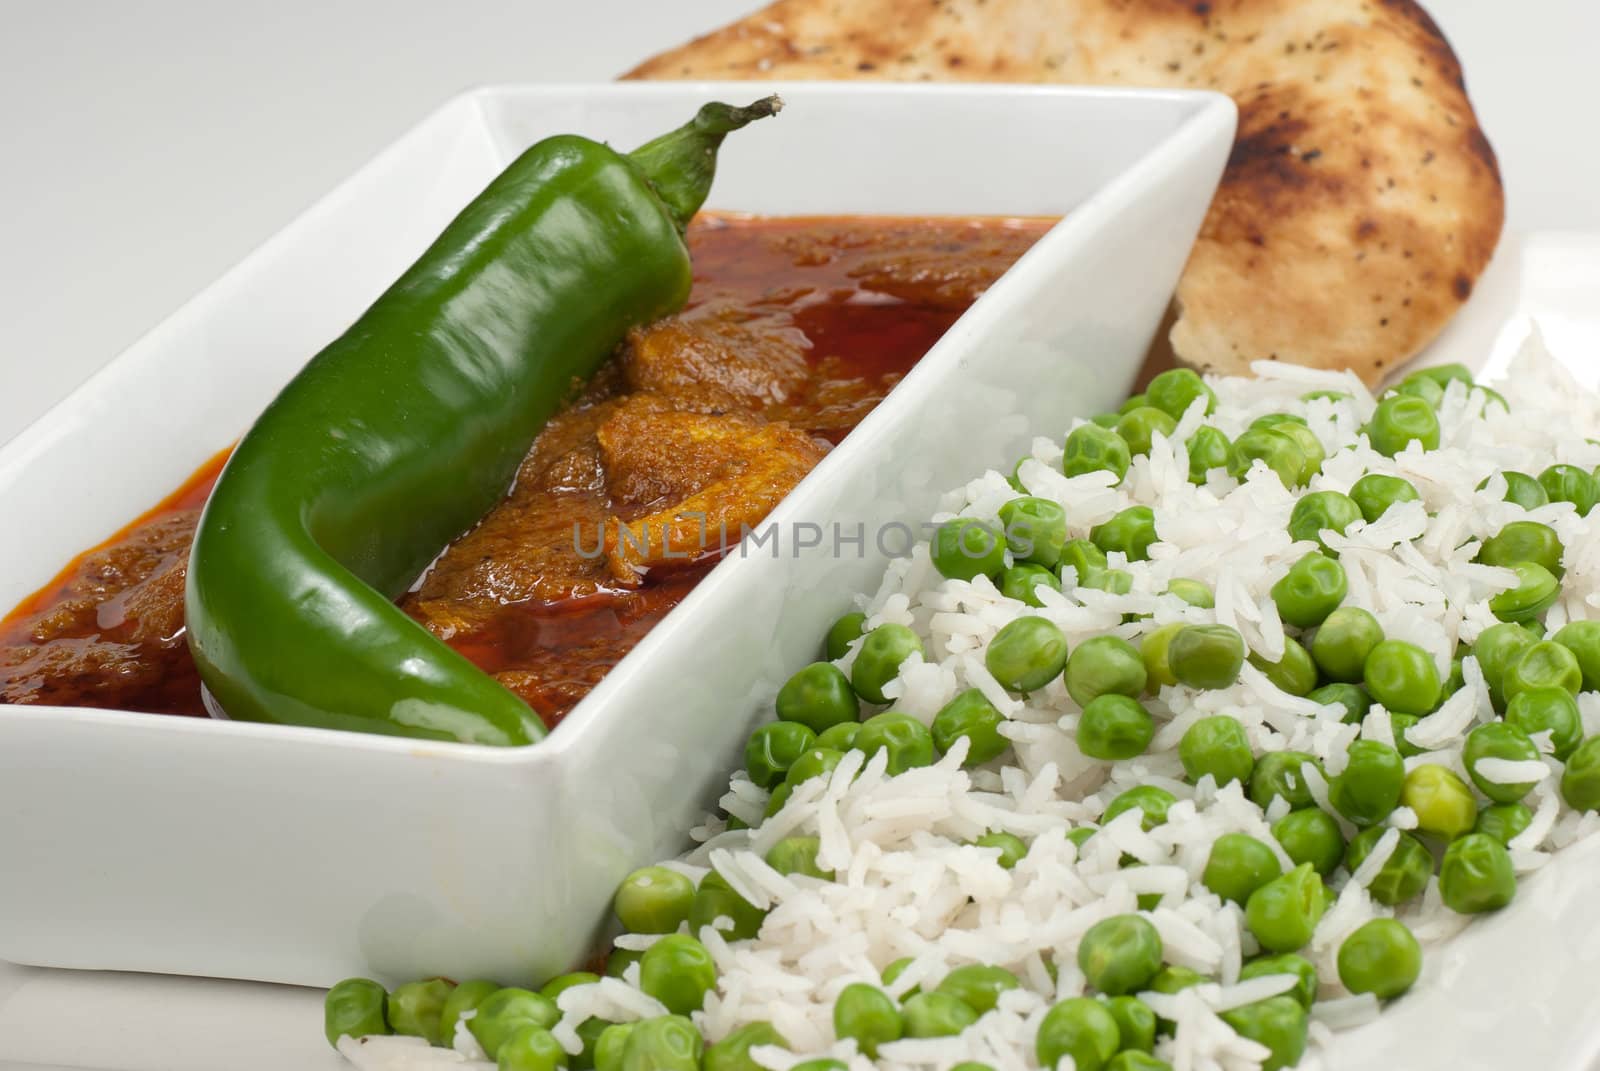 Chicken Madras curry served with rice and naan bread